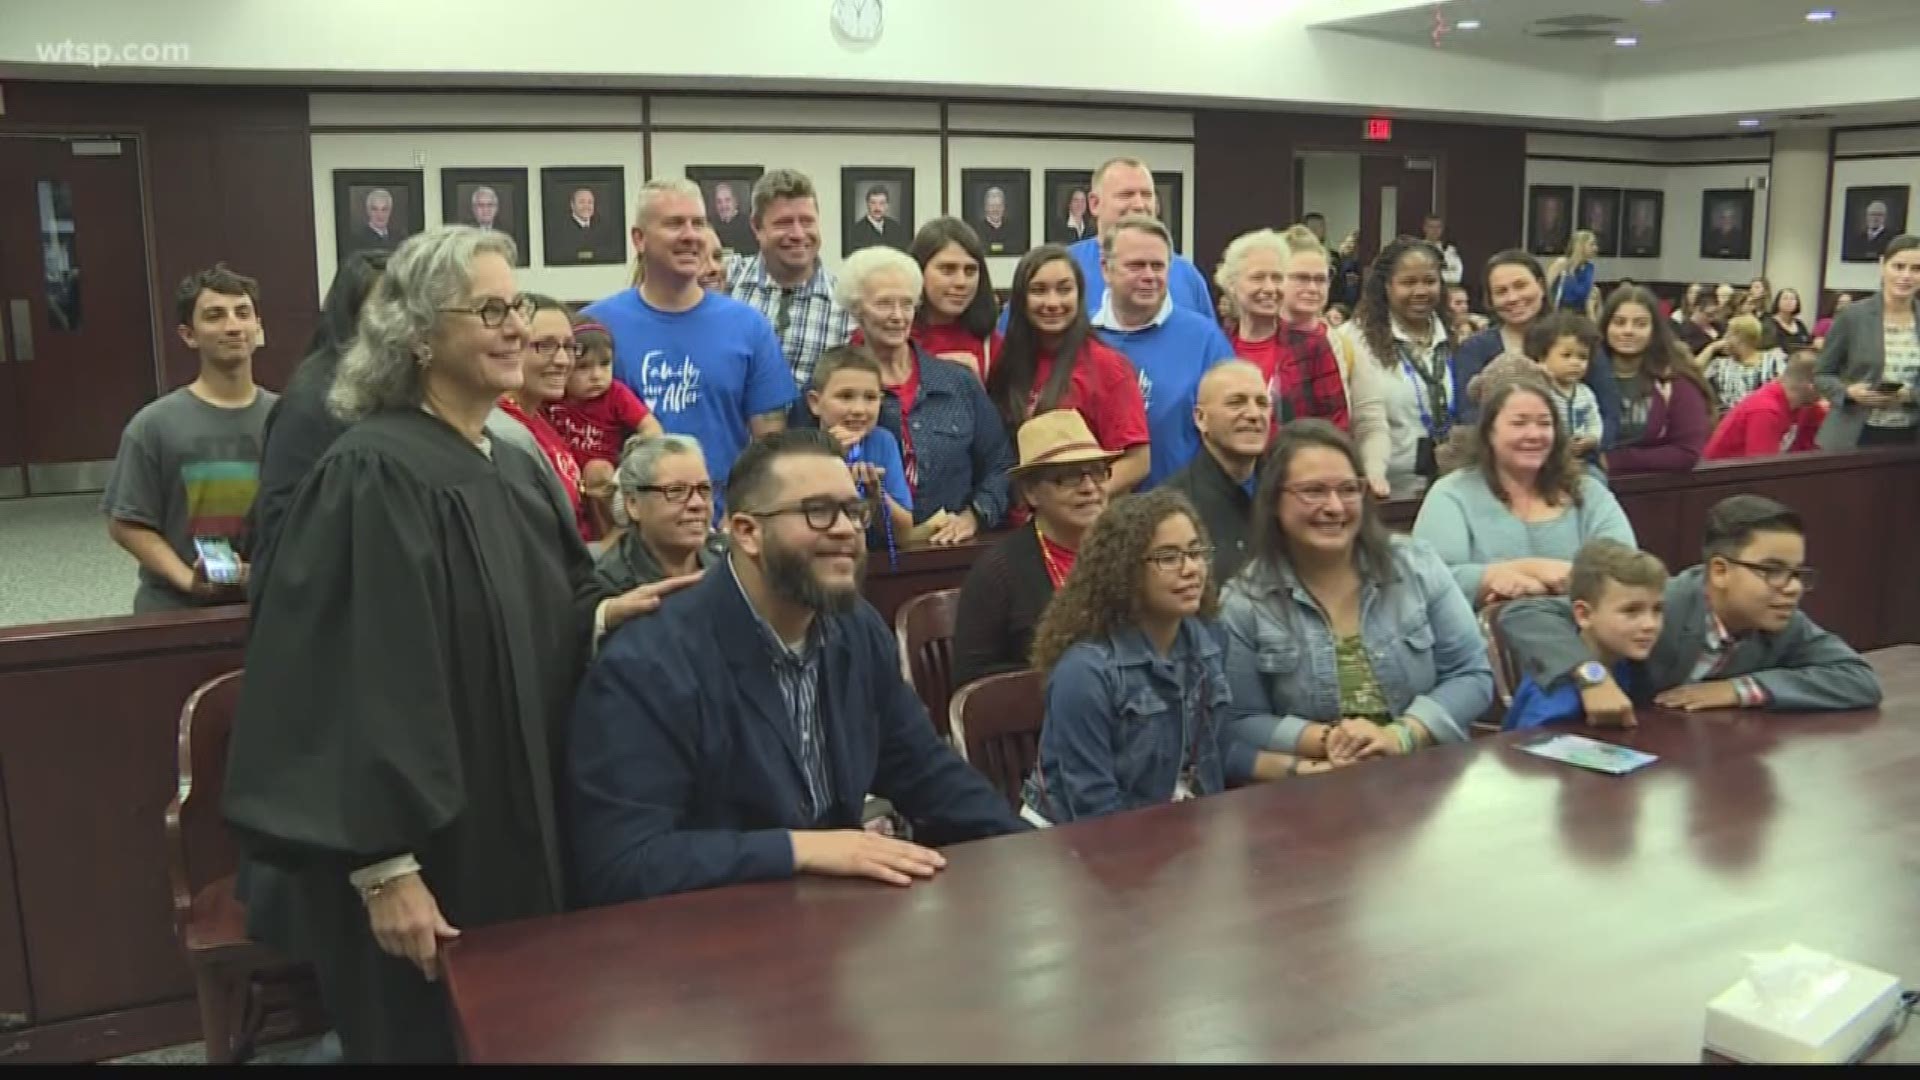 It was part of Hillsborough County's National Adoption Day. November is National Adoption Month.